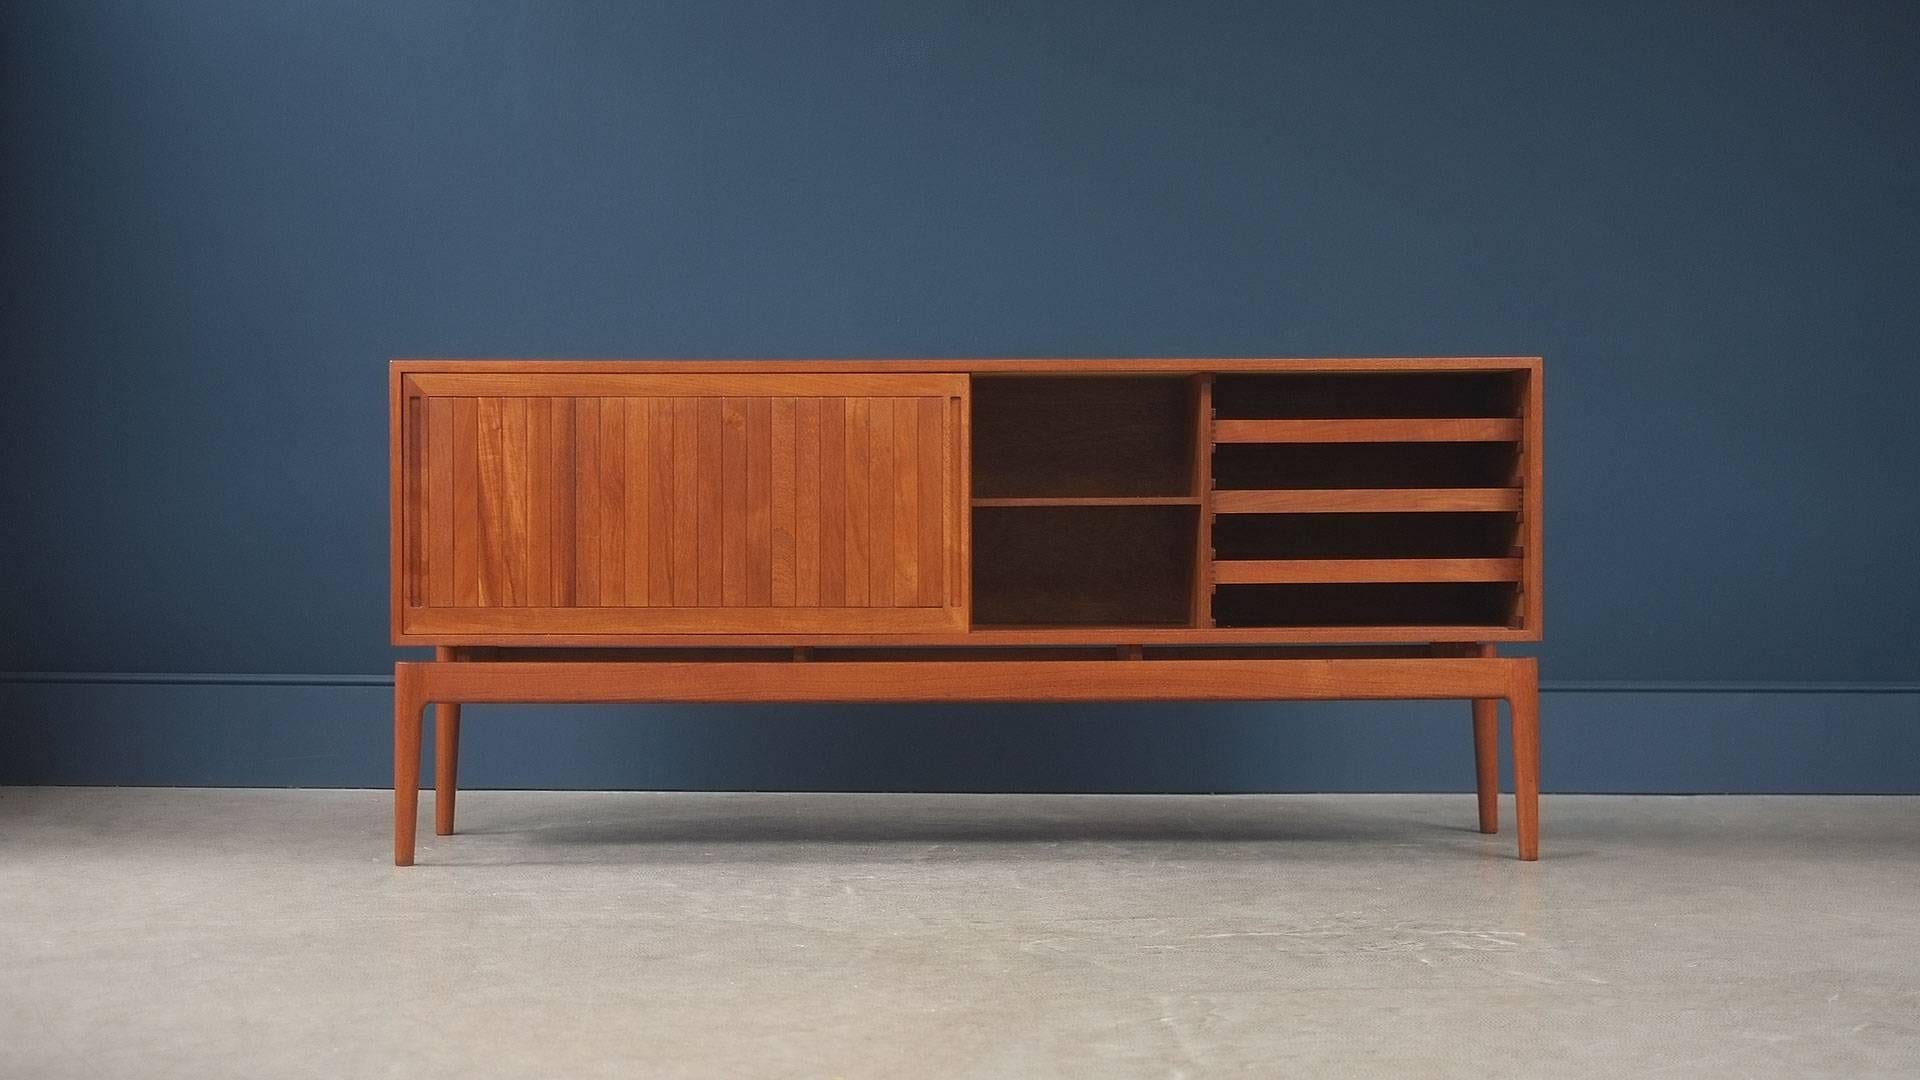 Ultra elegant sideboard in teak with wonderful proportions and fantastic detailing by as yet unknown designer, Denmark, circa 1960. Amazing quality.